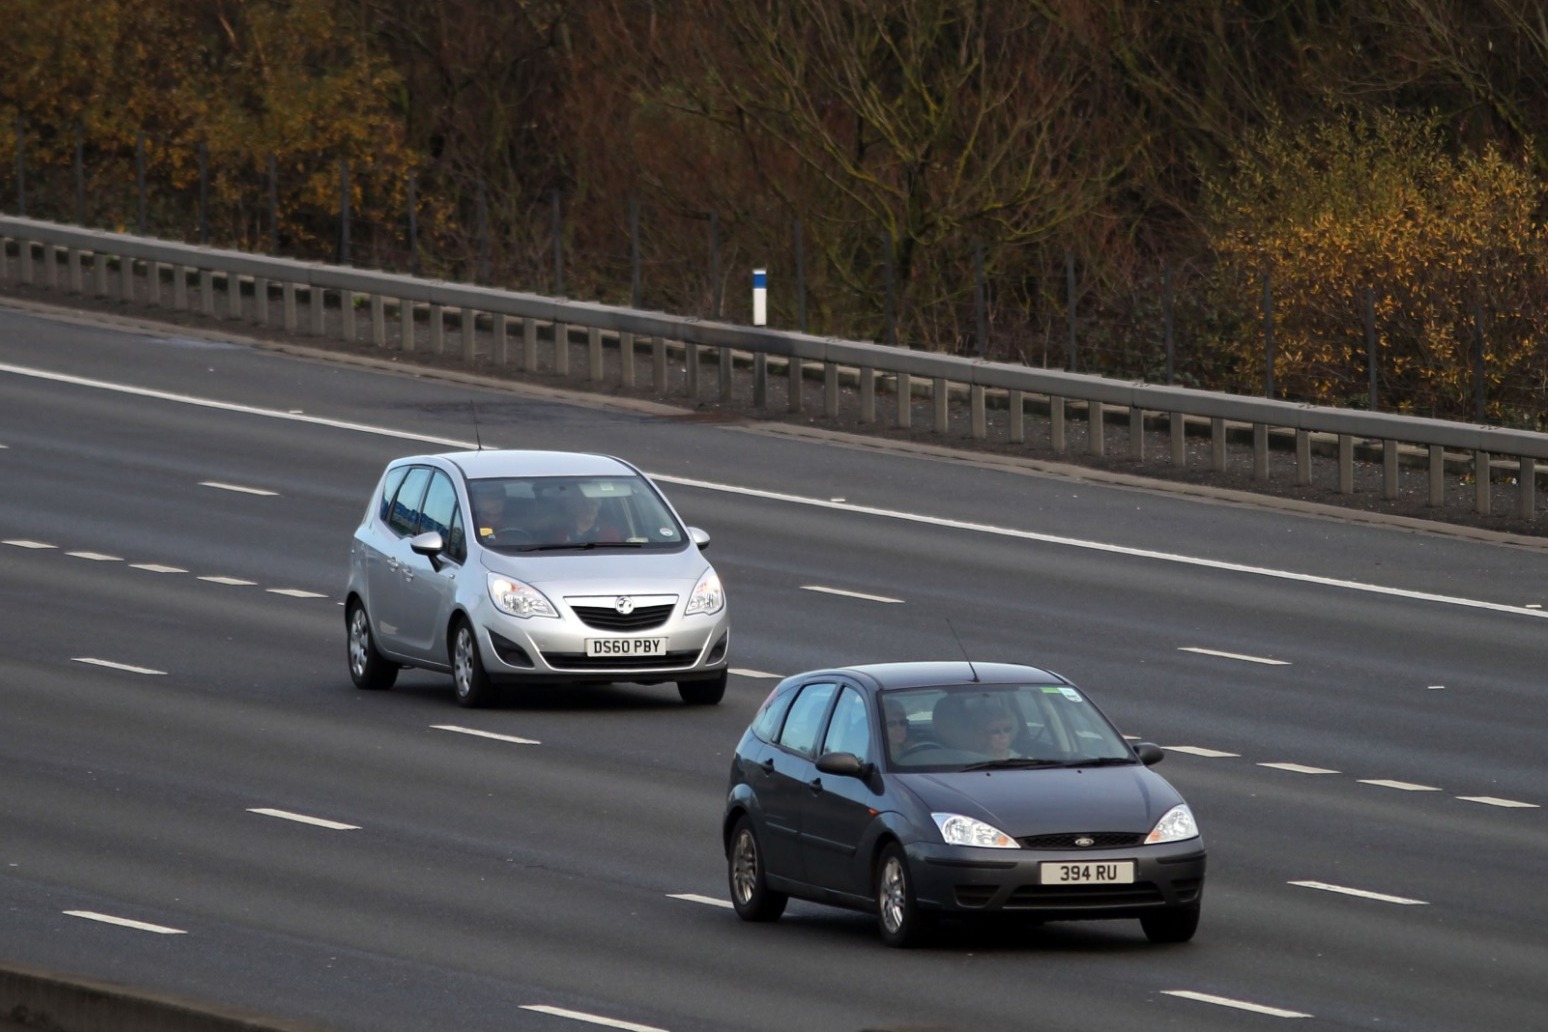 Motor insurers ‘facing challenges from rising costs and supply chain issues’ 